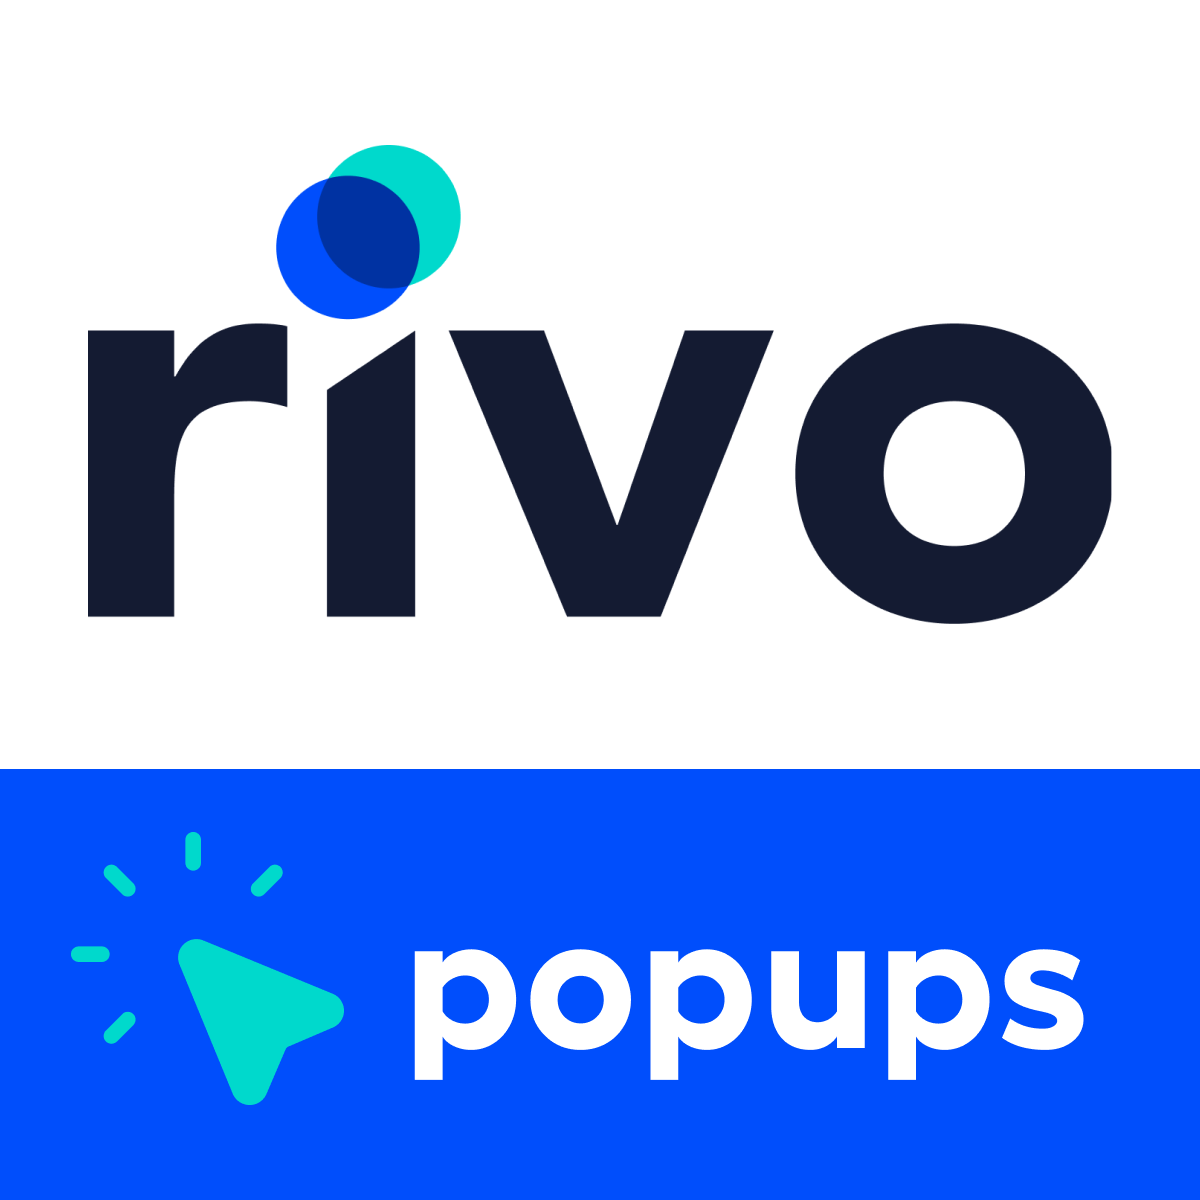 Hire Shopify Experts to integrate Rivo Email Popups app into a Shopify store